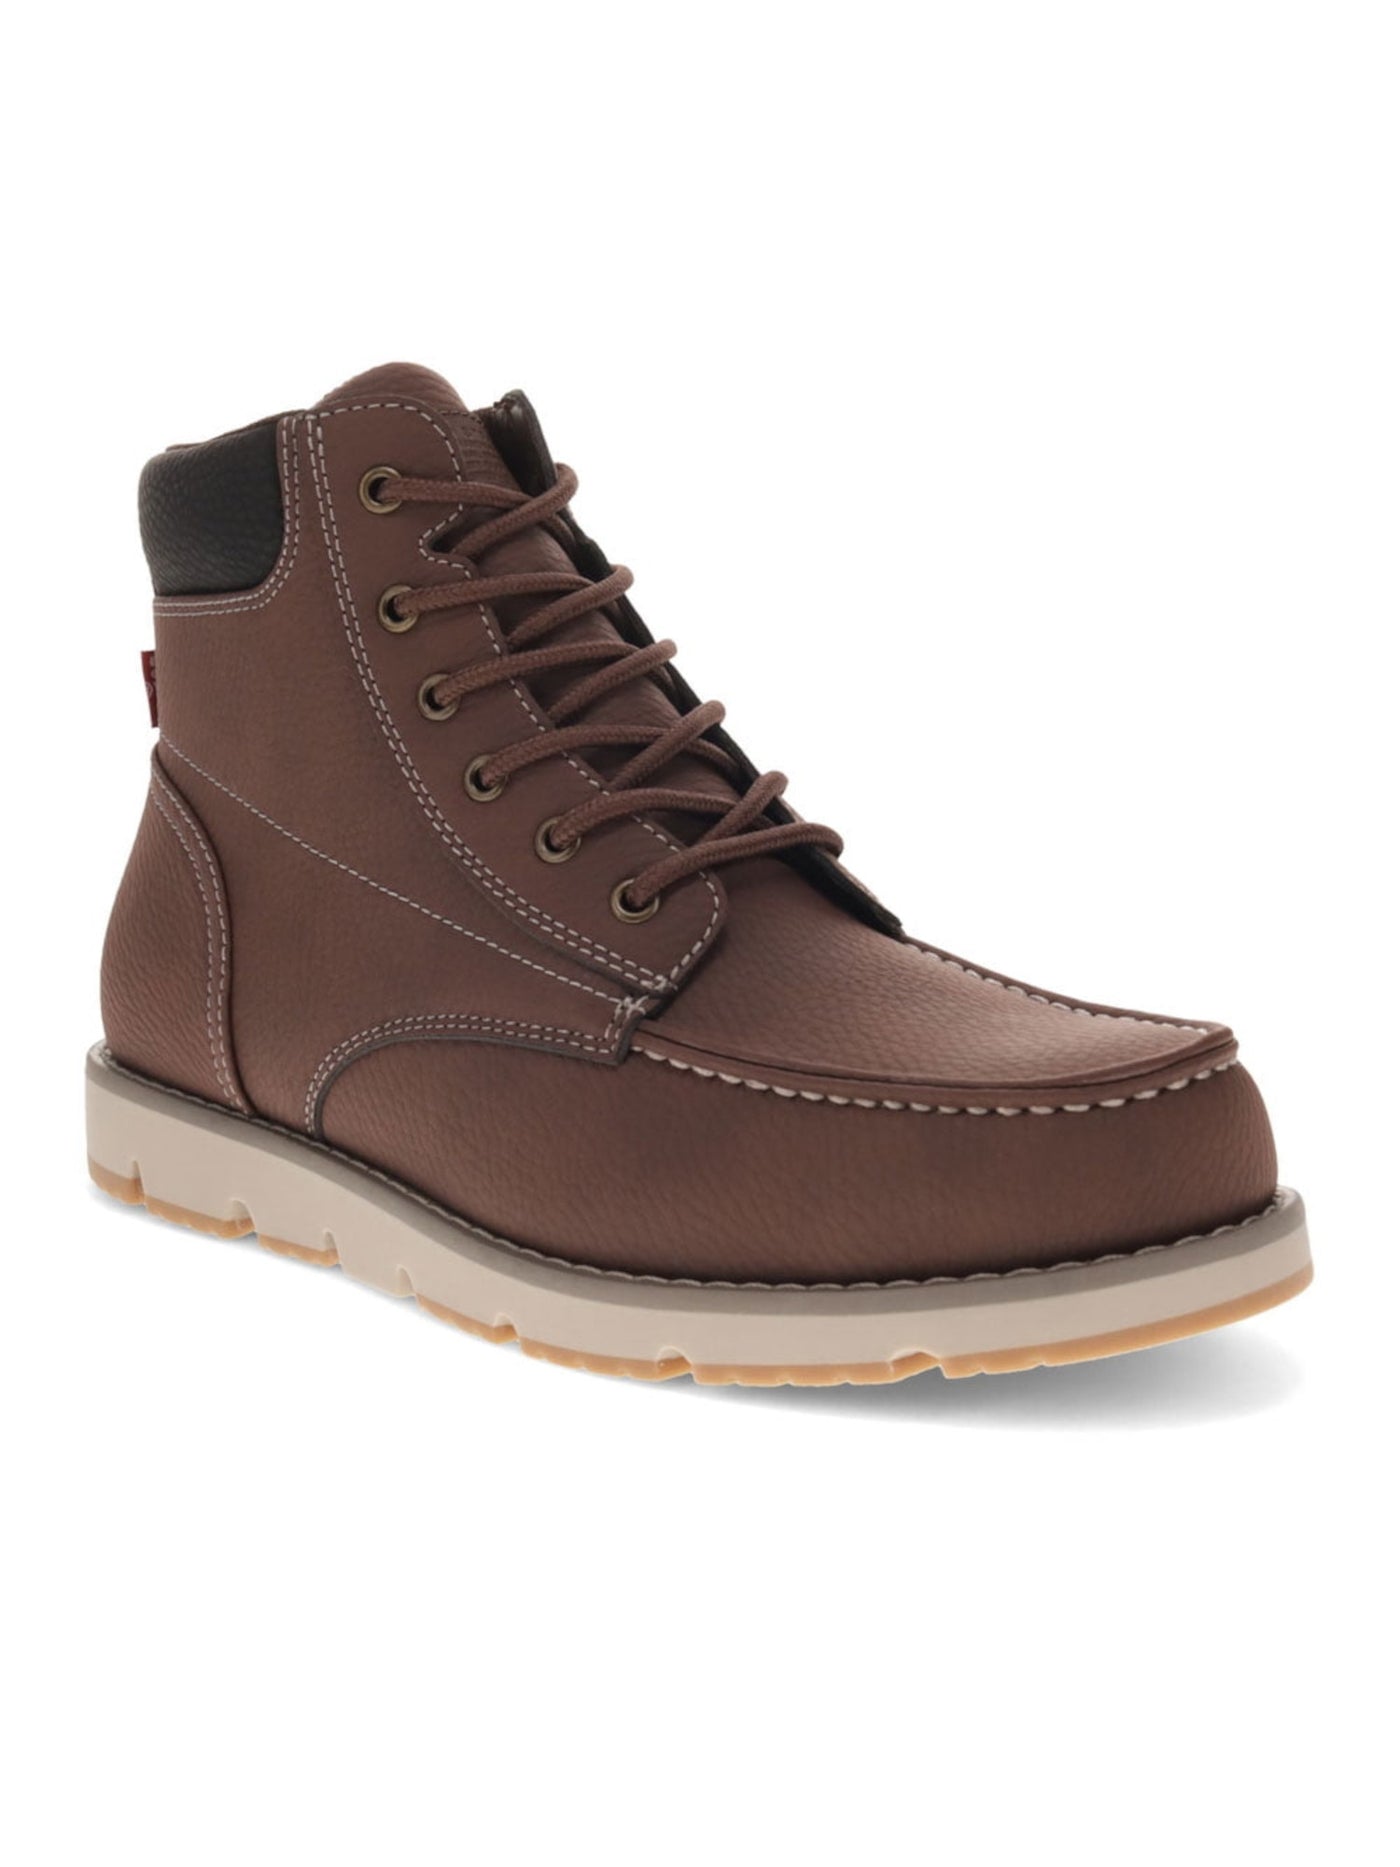 LEVI'S Mens Brown Pull Tab Cushioned Removable Insole Dean Round Toe Wedge Lace-Up Chukka Boots 8